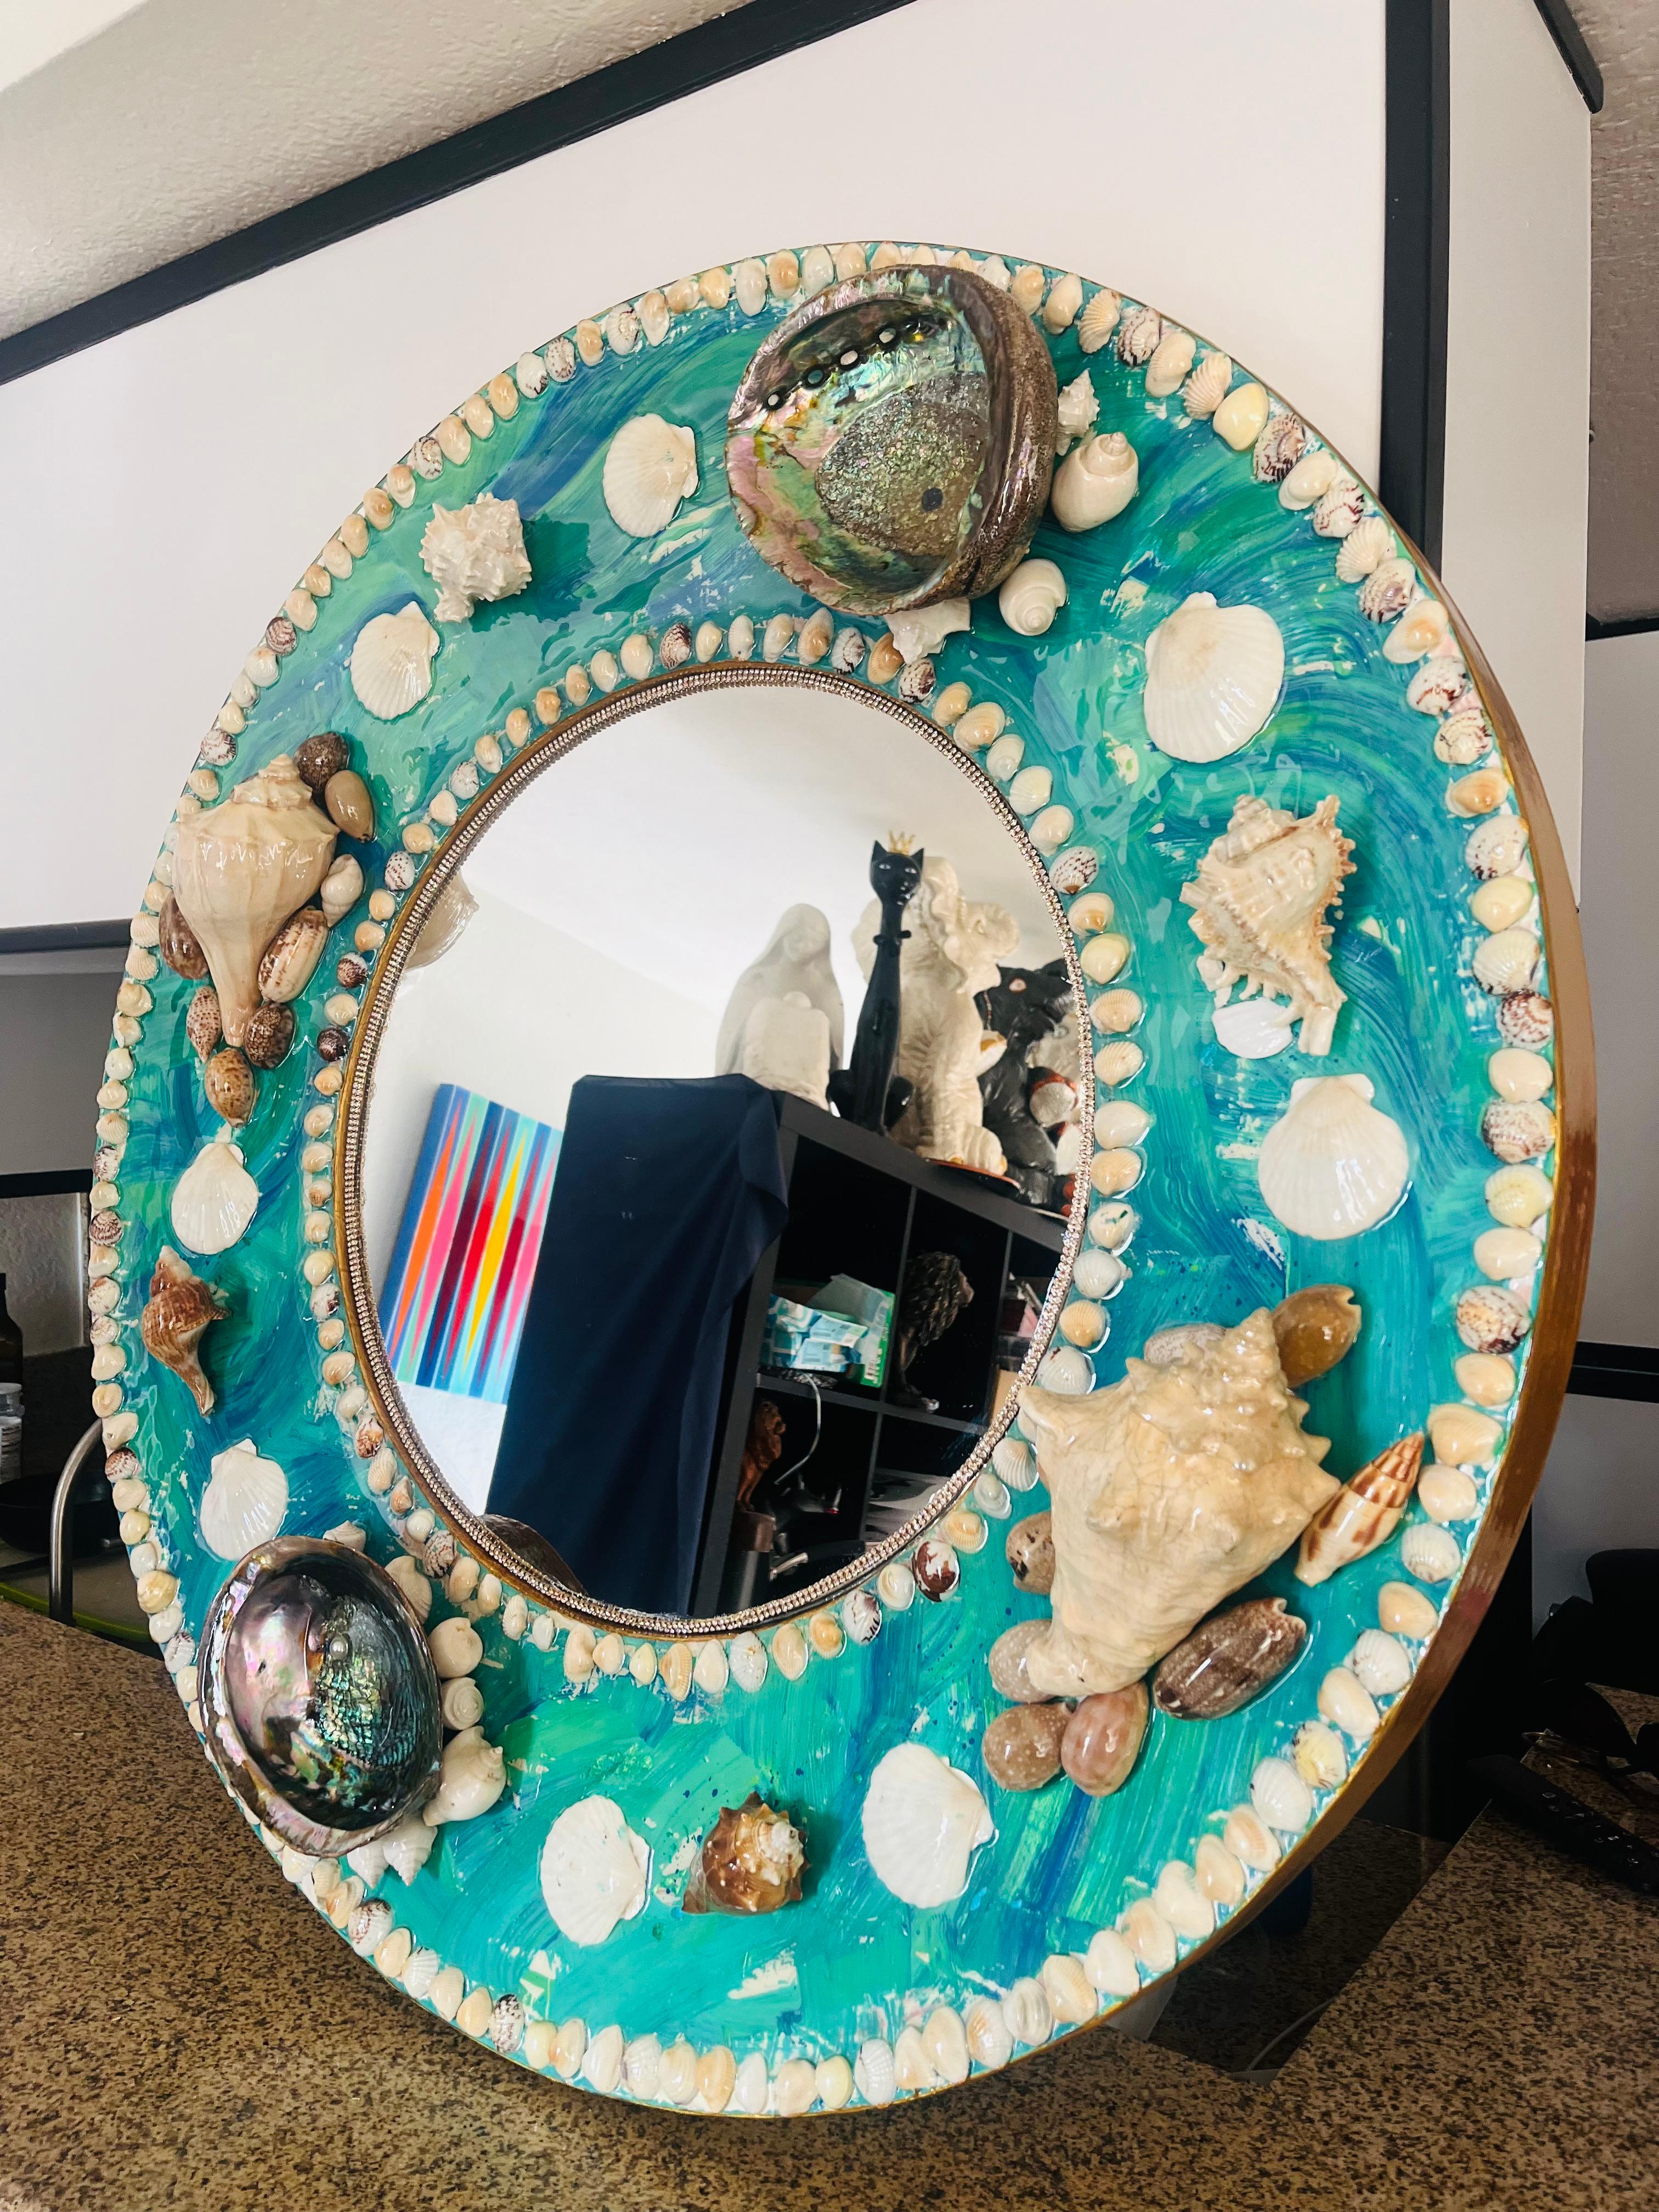                  **ANNUAL SUPER SALE TIL JUNE 15th ONLY**
*This Price Won't Be Repeated Again This Year - Take Advantage Of It*

One of a kind seashells encrusted round mirror.

There are many seashells encrusted mirrors but this one is the only one